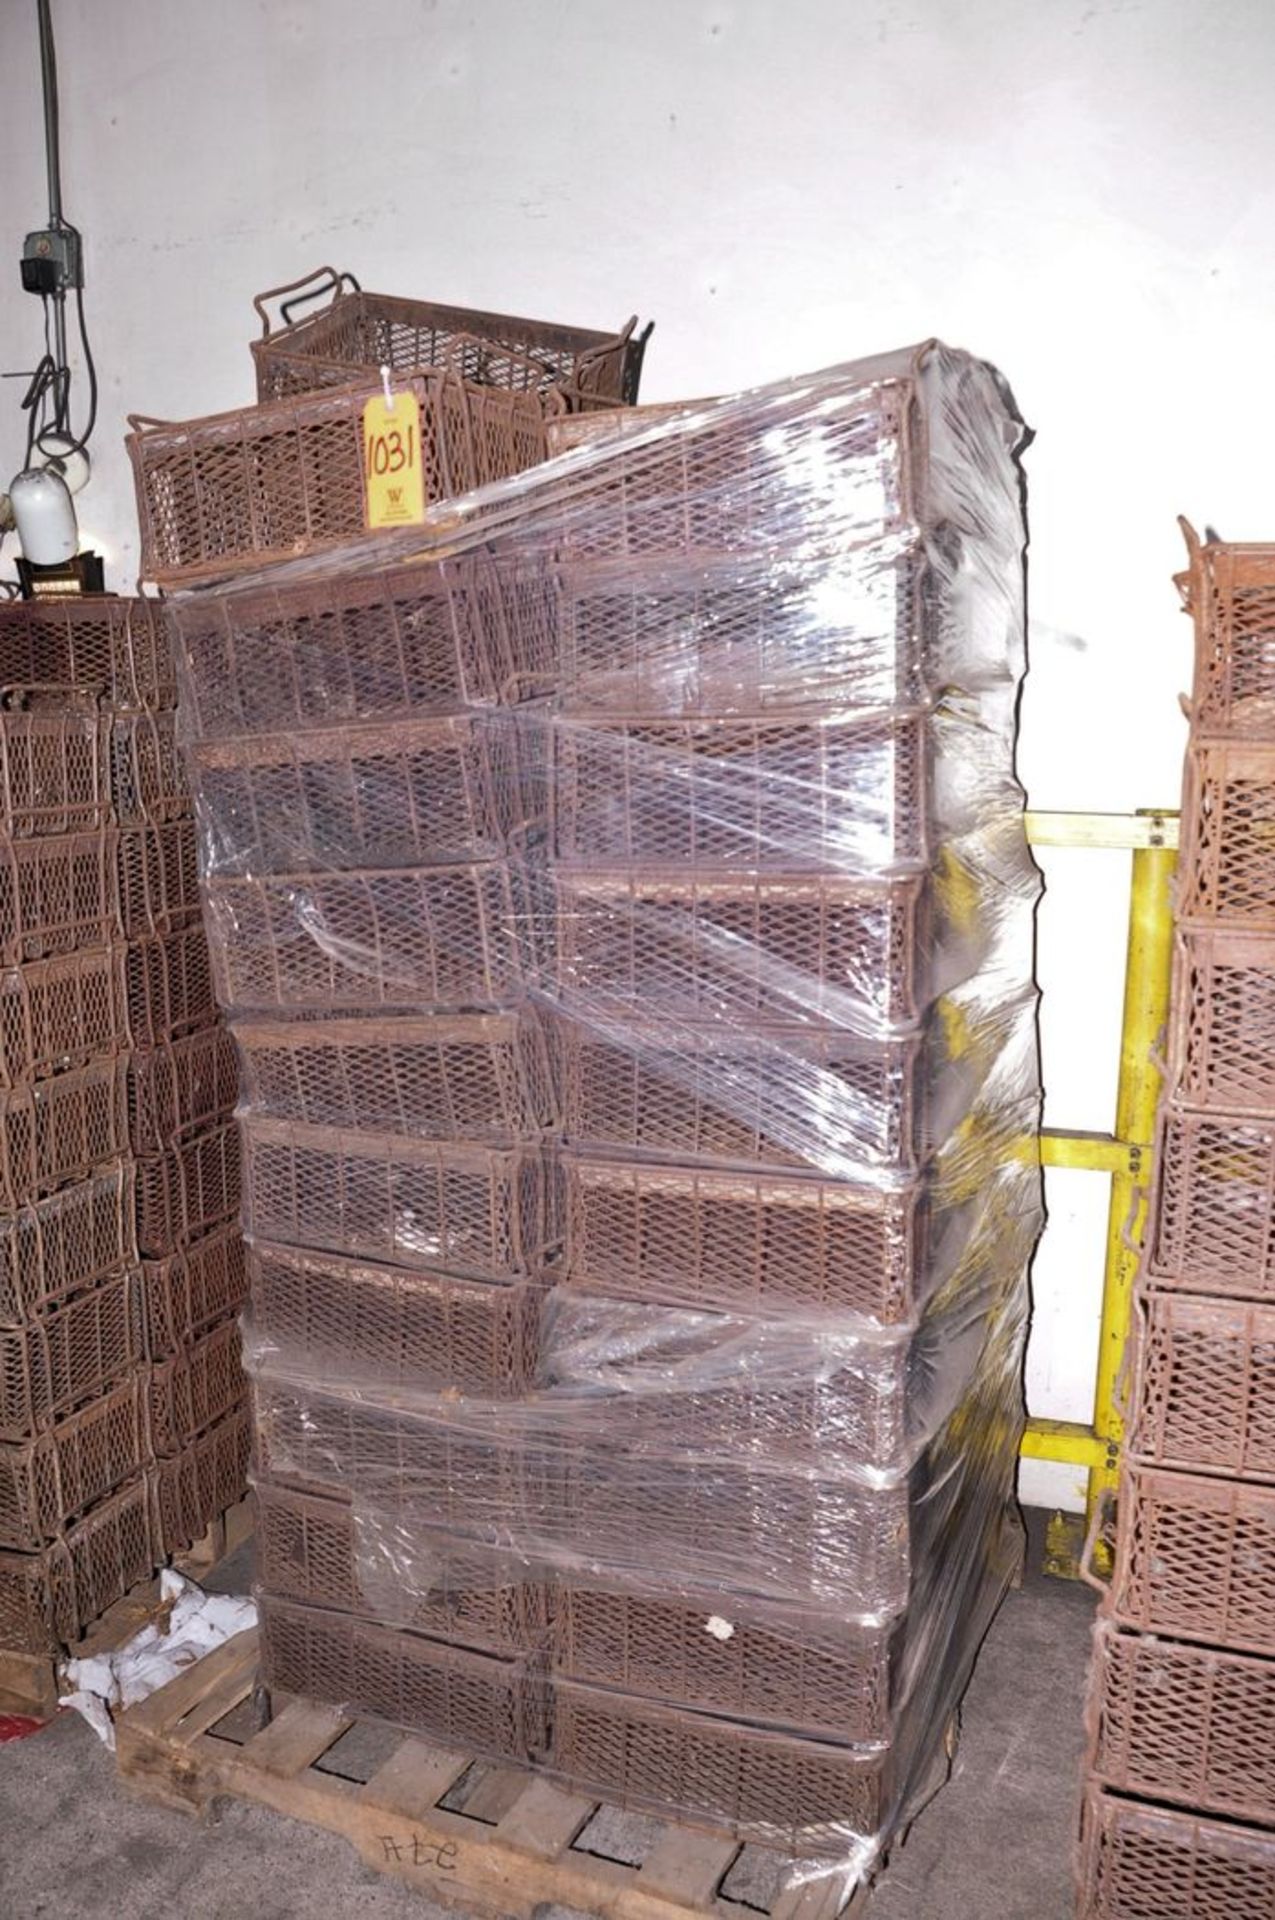 Lot - Steel Wire Baskets on (1) Pallet (Removal Cost : N/C)